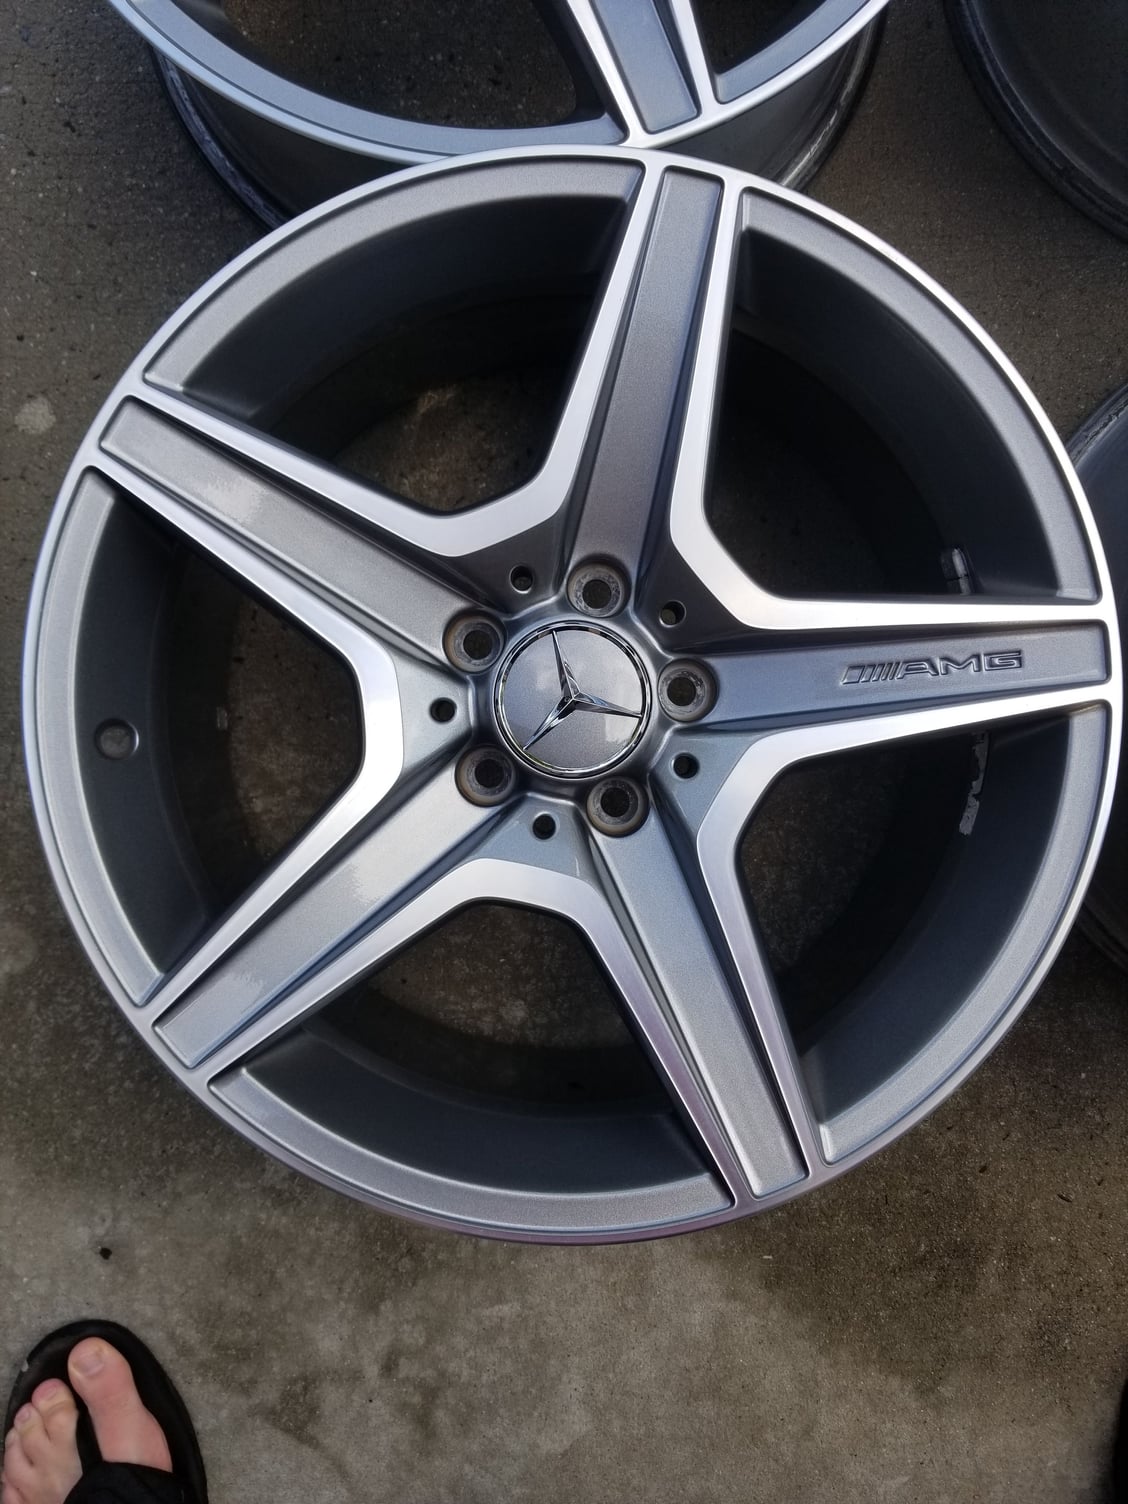 Wheels and Tires/Axles - W204 C63 Factory Wheels - Used - 2008 to 2014 Mercedes-Benz C63 AMG - Charlotte, NC 28078, United States